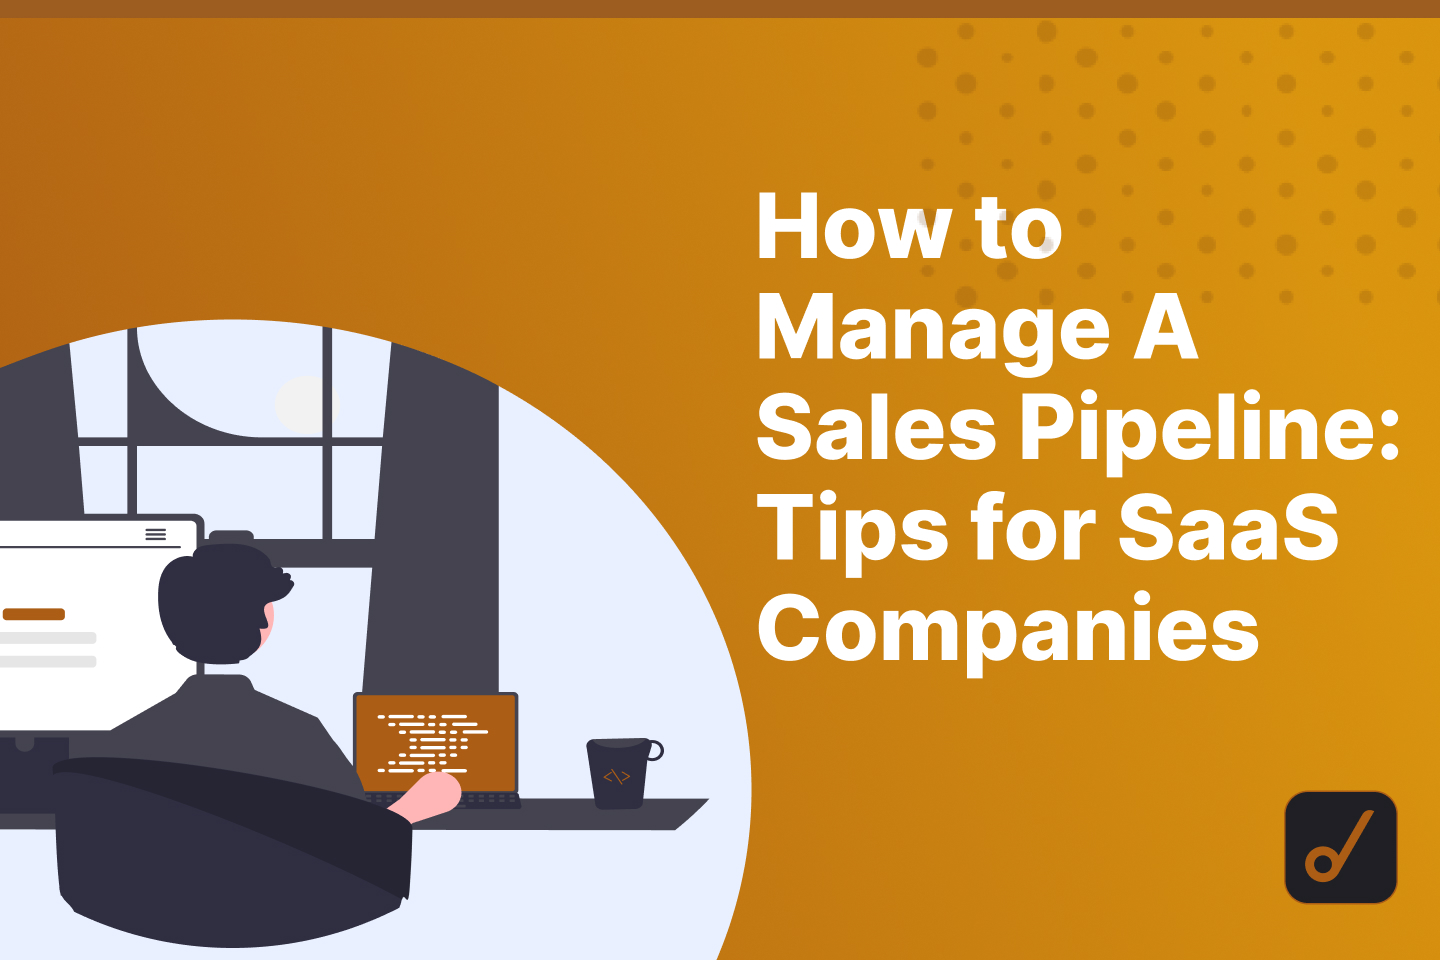 How to Manage a Sales Pipeline: 6 Tips for SaaS Companies